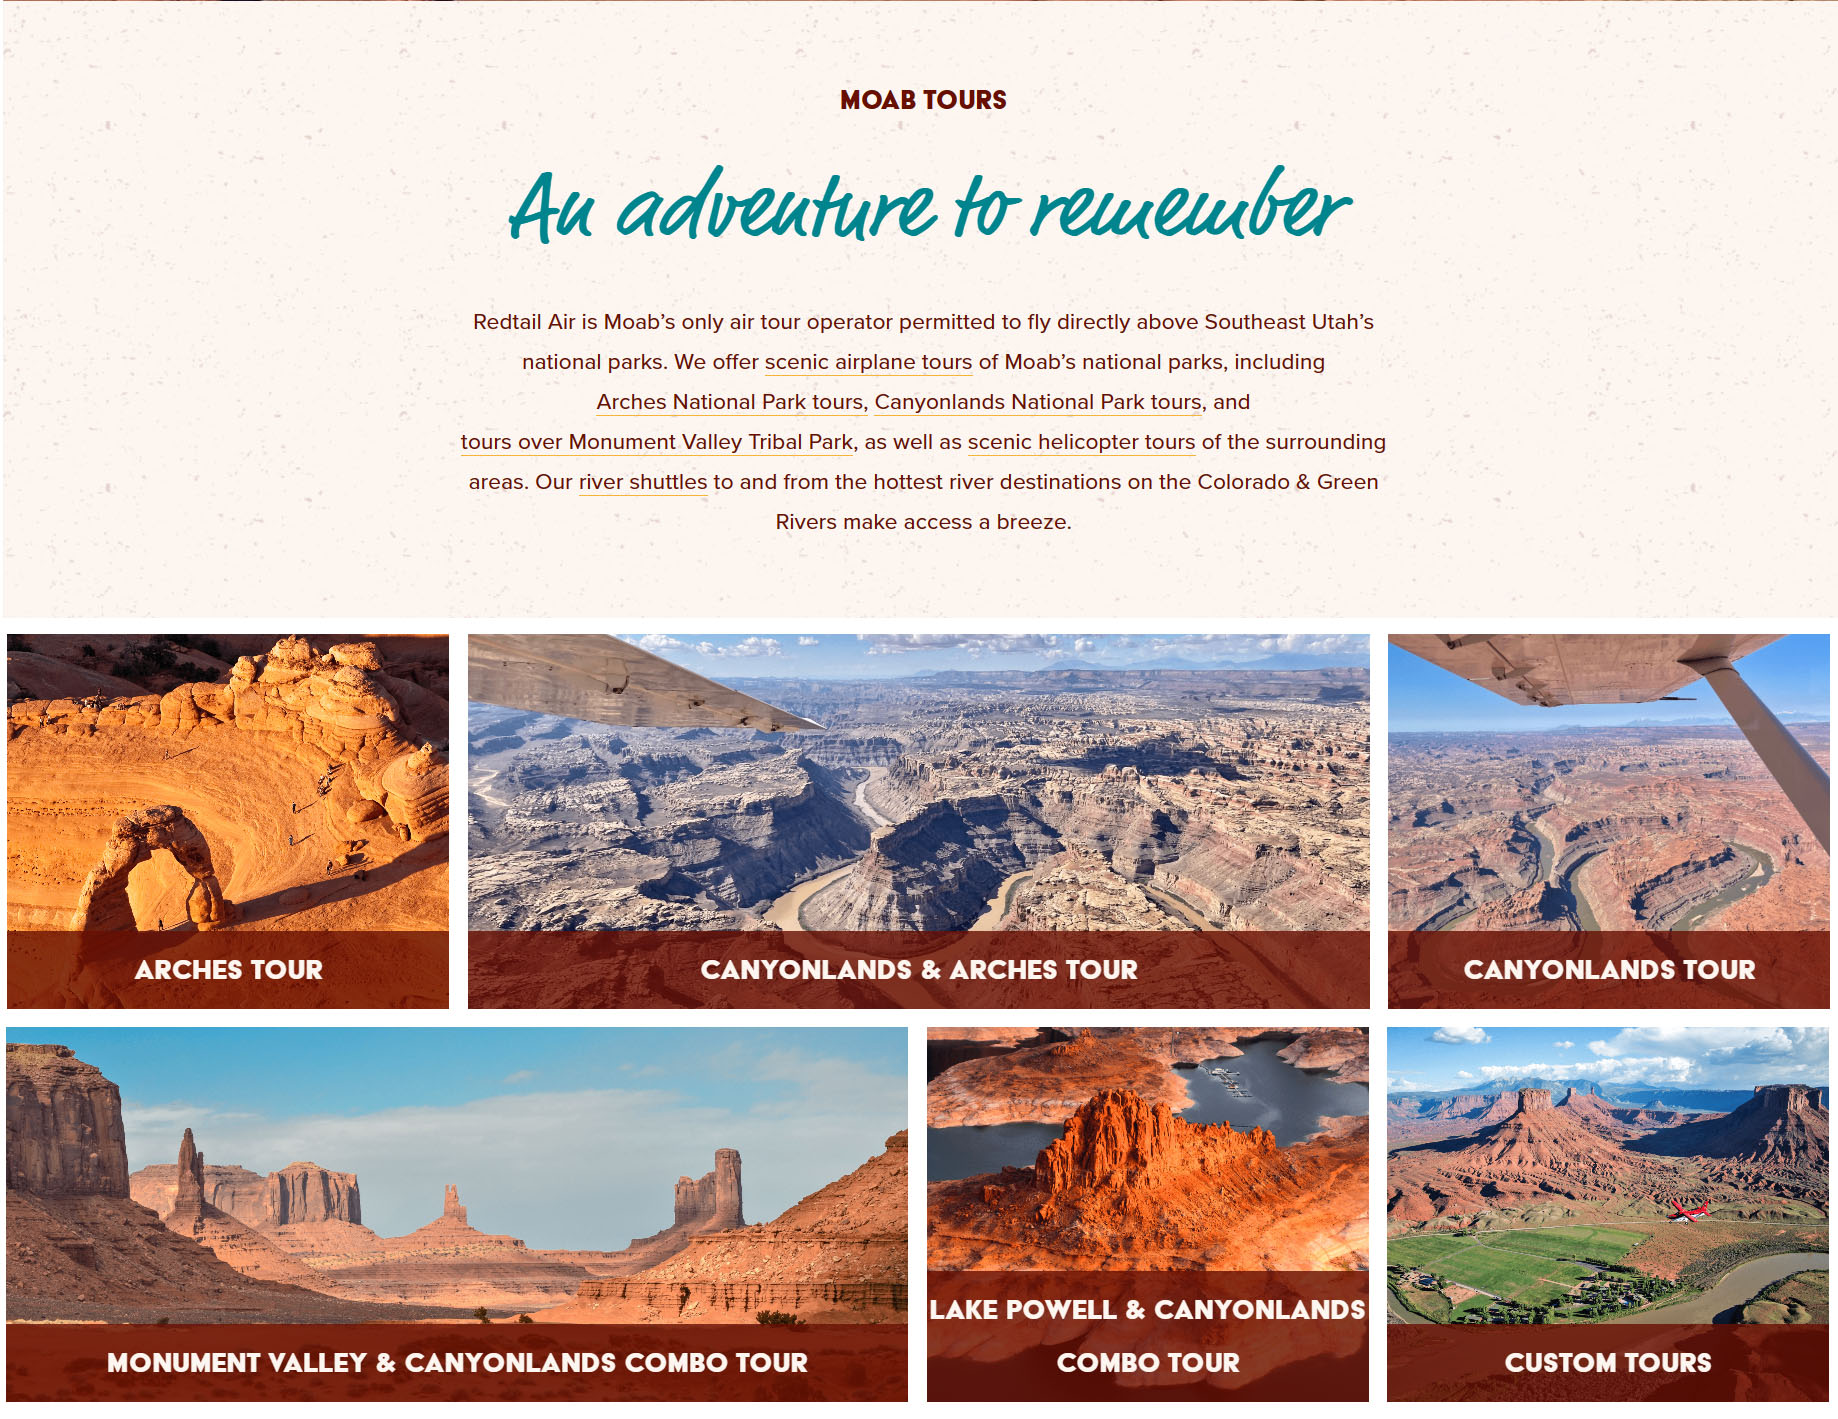 Explore Southeastern Utah National Parks & Surrounding Areas with Redtail Air Tours